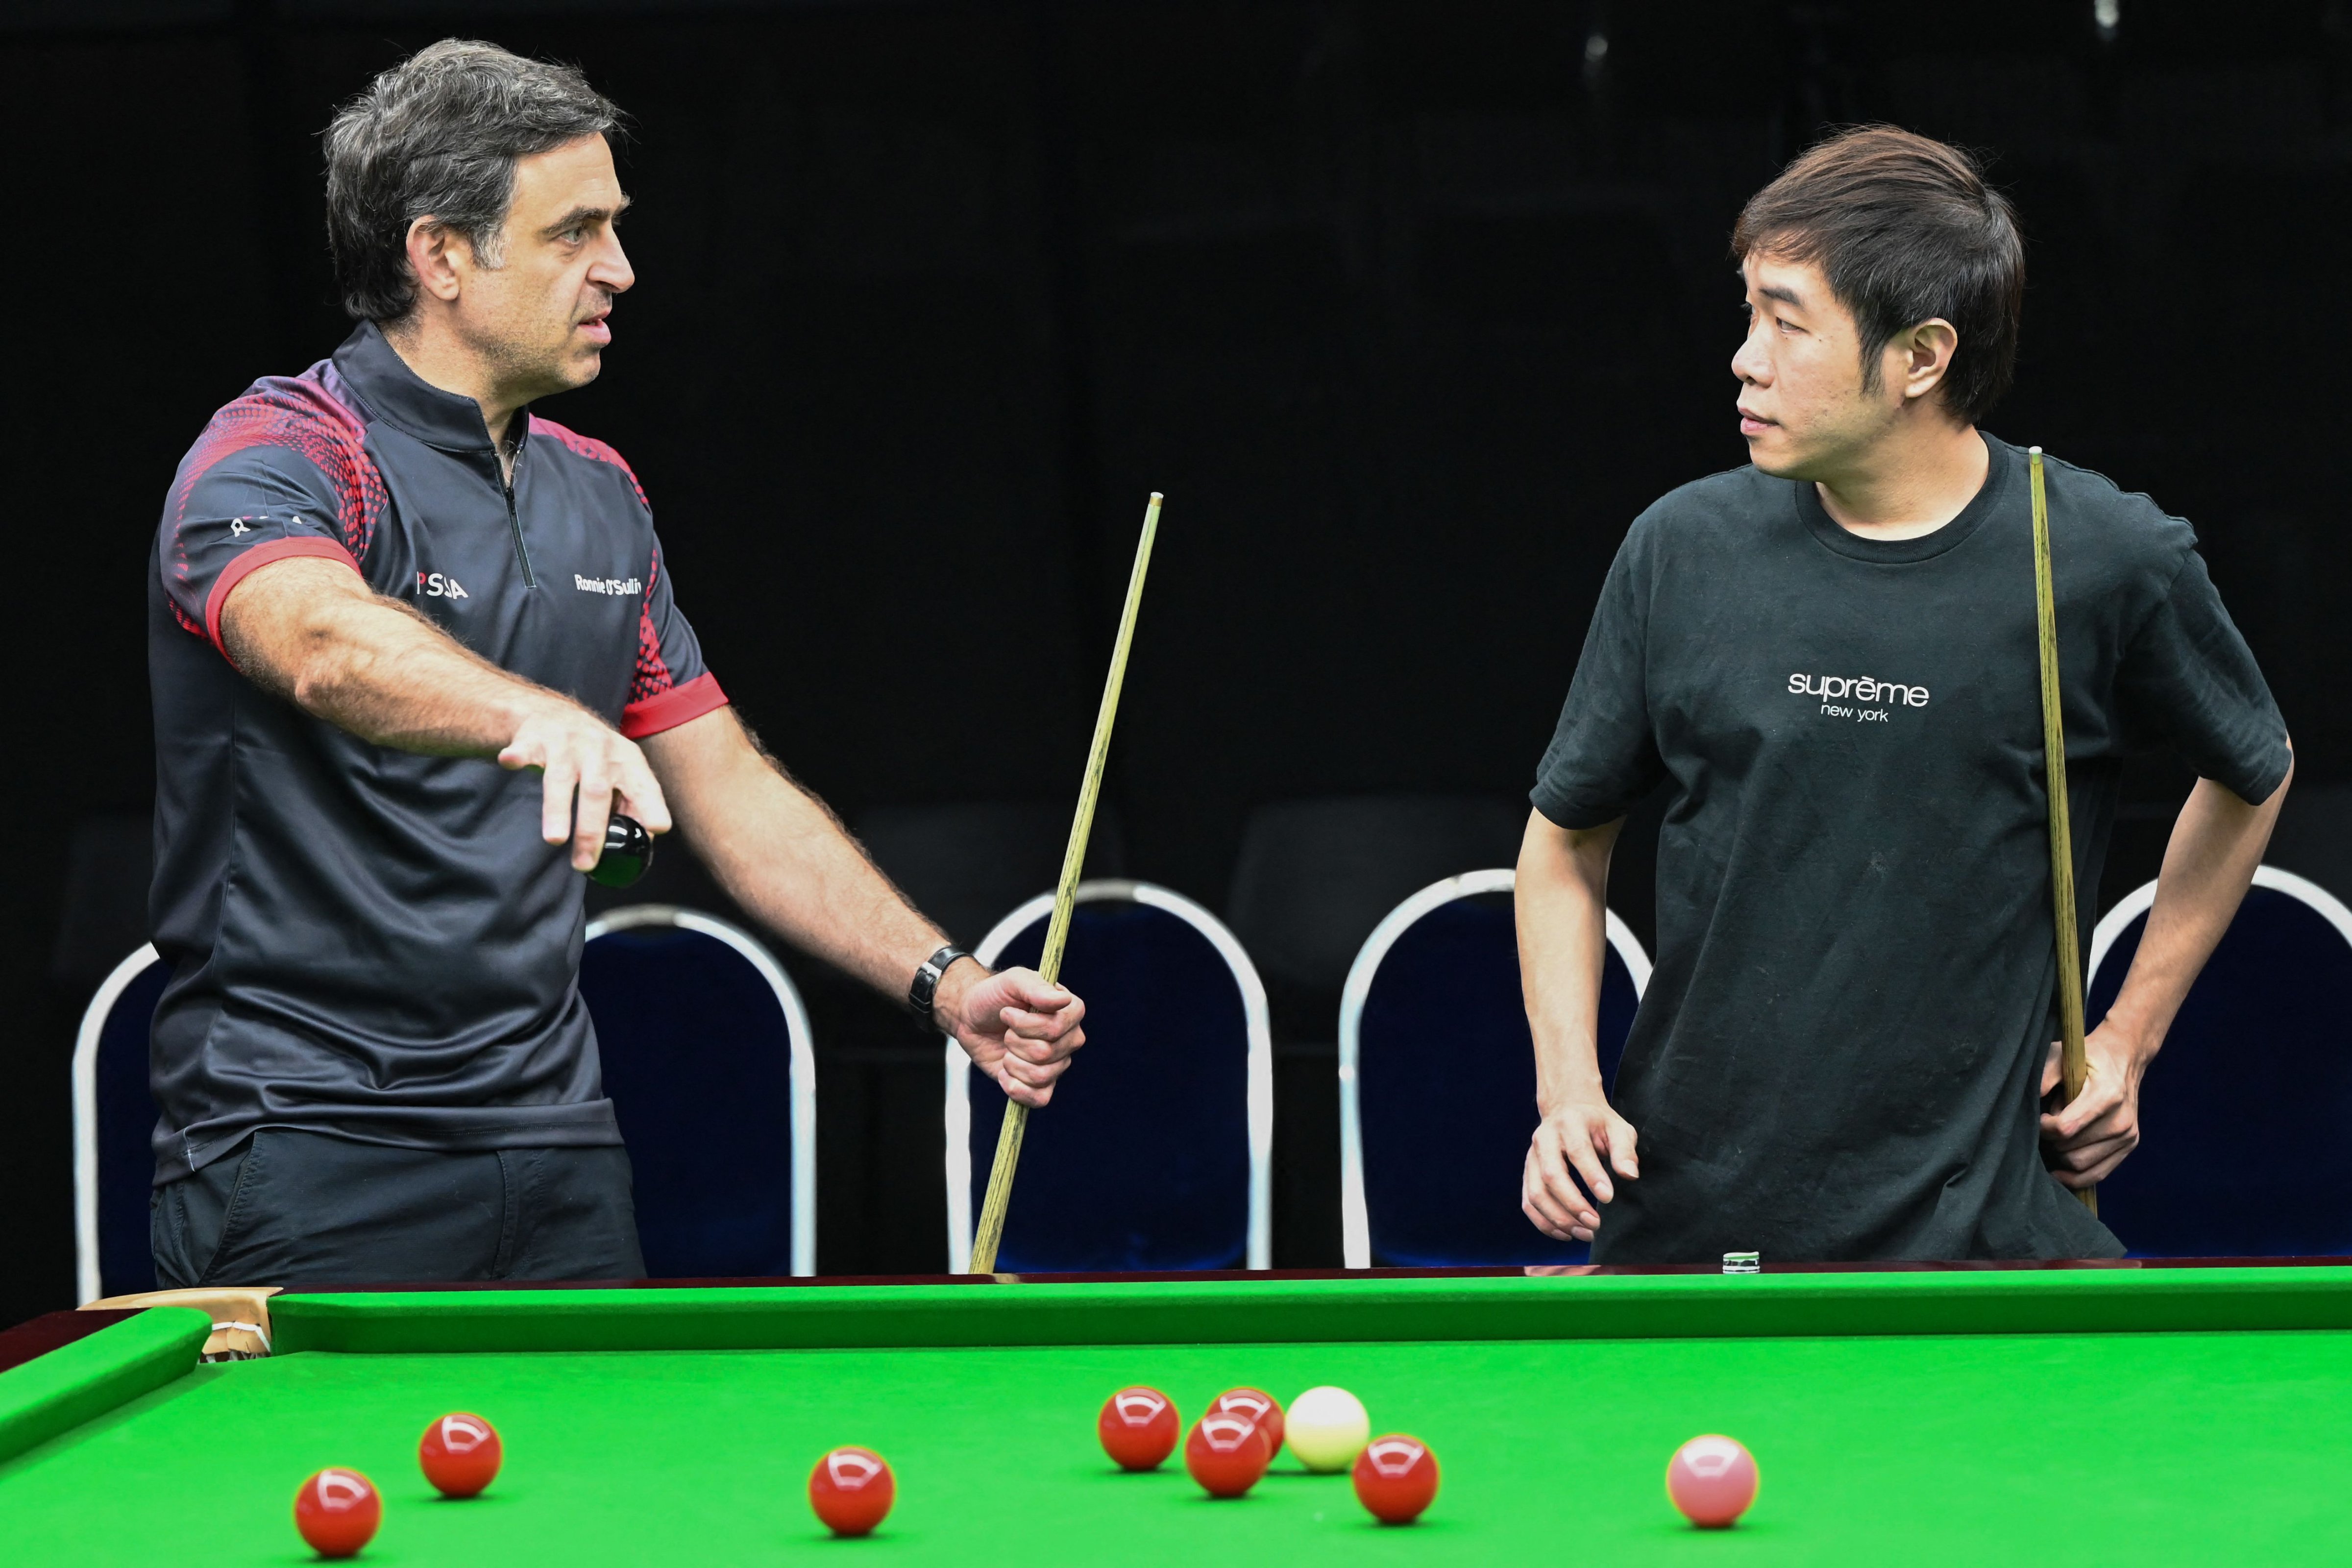 World No. 1 Ronnie O'Sullivan gives a snooker lesson to Singapore's national player Jaden Ong at the newly opened Ronnie O'Sullivan academy in Singapore on June 13, 2022. (Roslan Rahman—AFP/Getty Images)